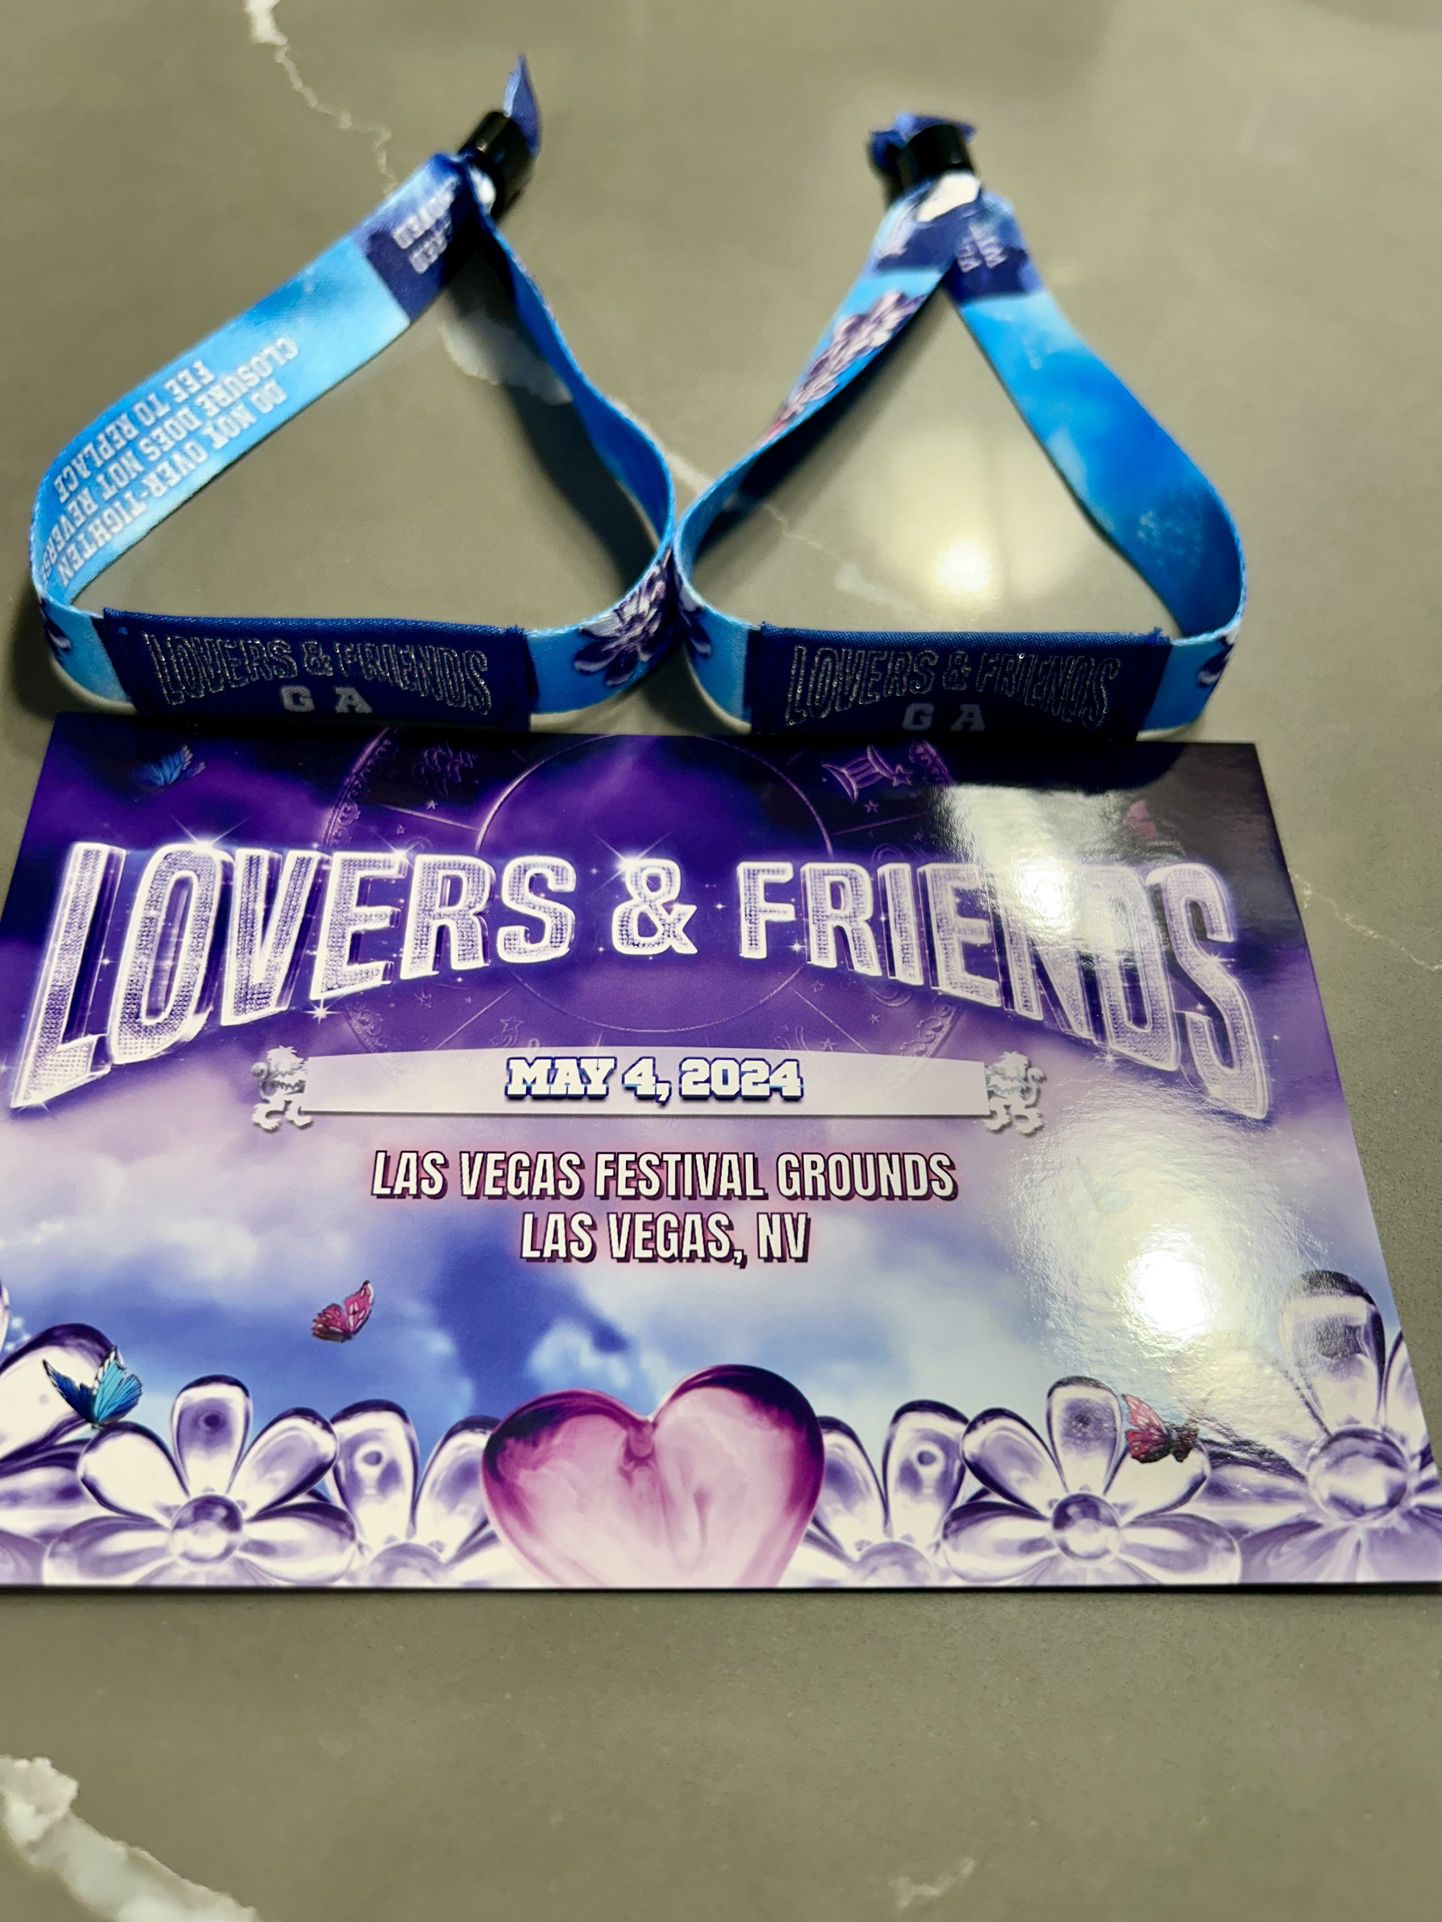 GA Wristbands Tickets to Lovers and Friends Las Vegas May 5,